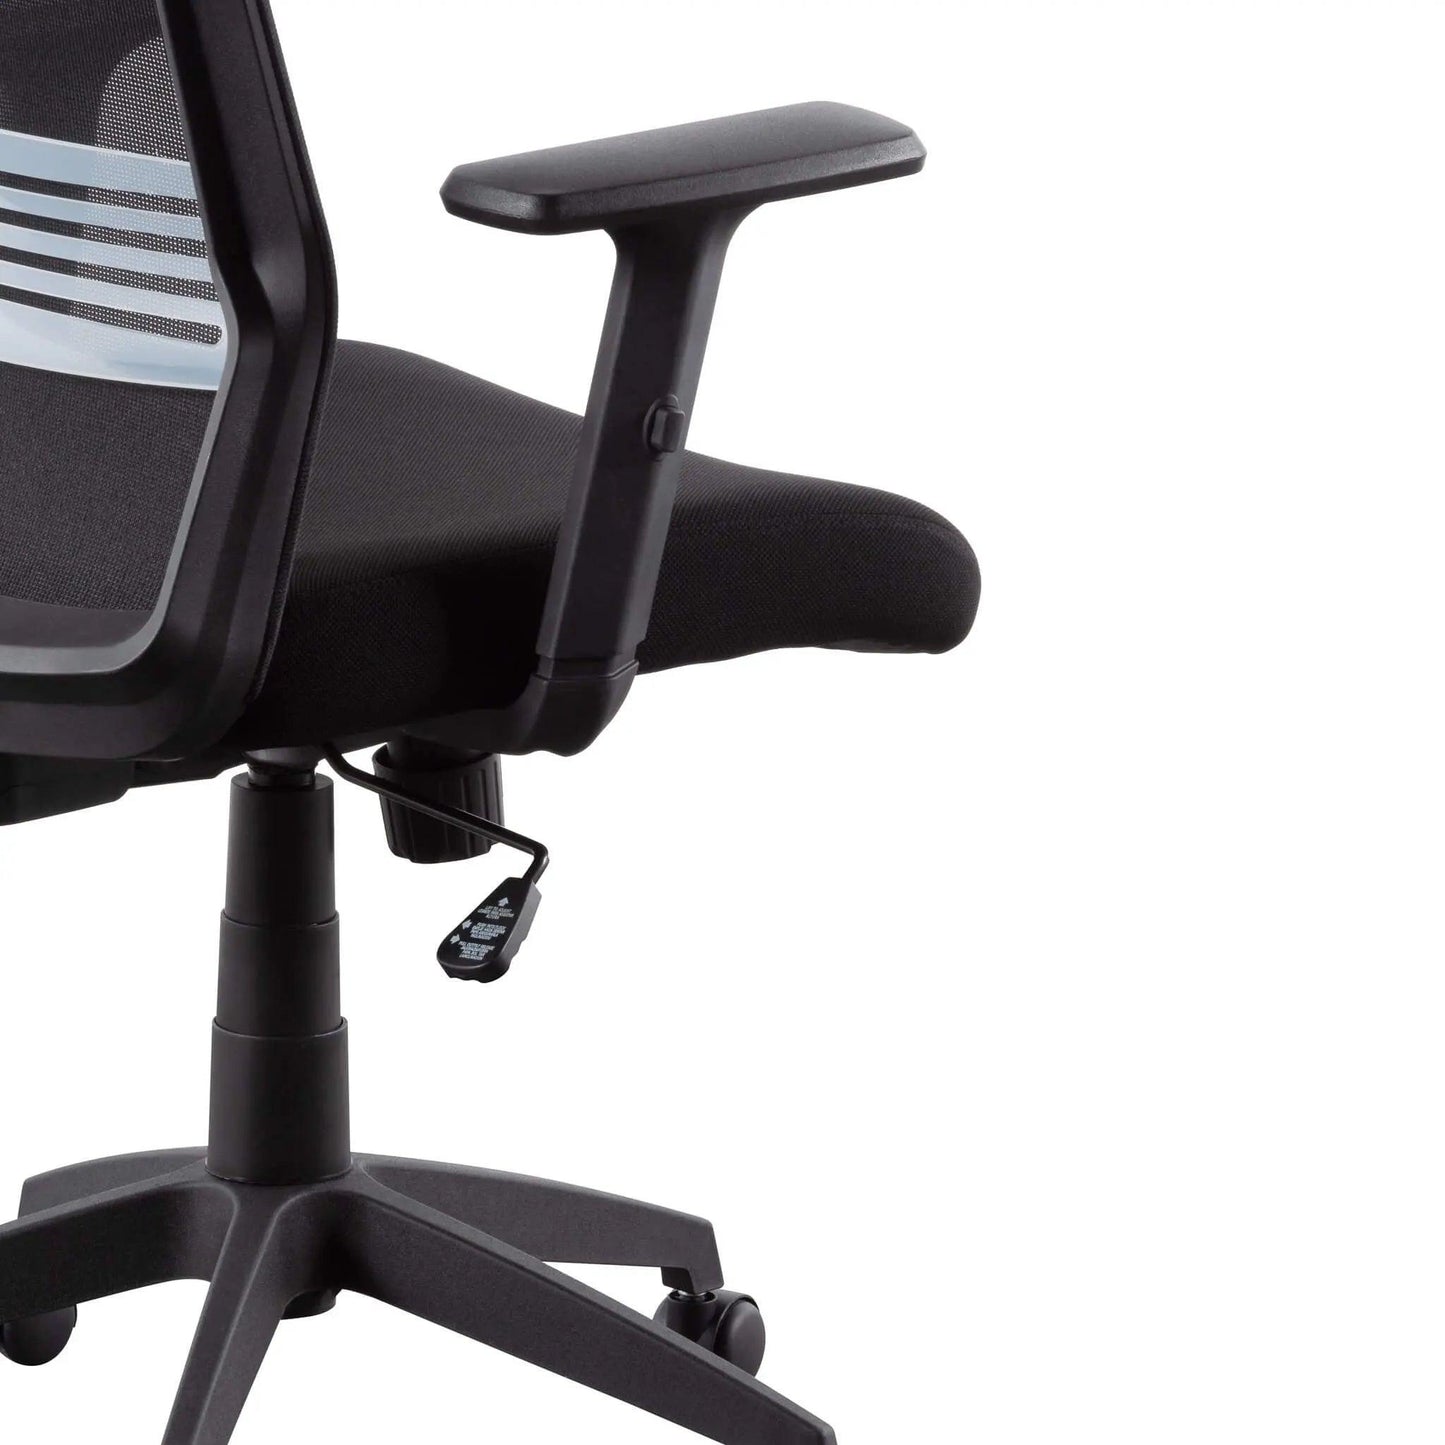 Calibre Mesh Office Chair - Full Black OC6207-LF - Office/Gaming ChairsOC6207-LF 5